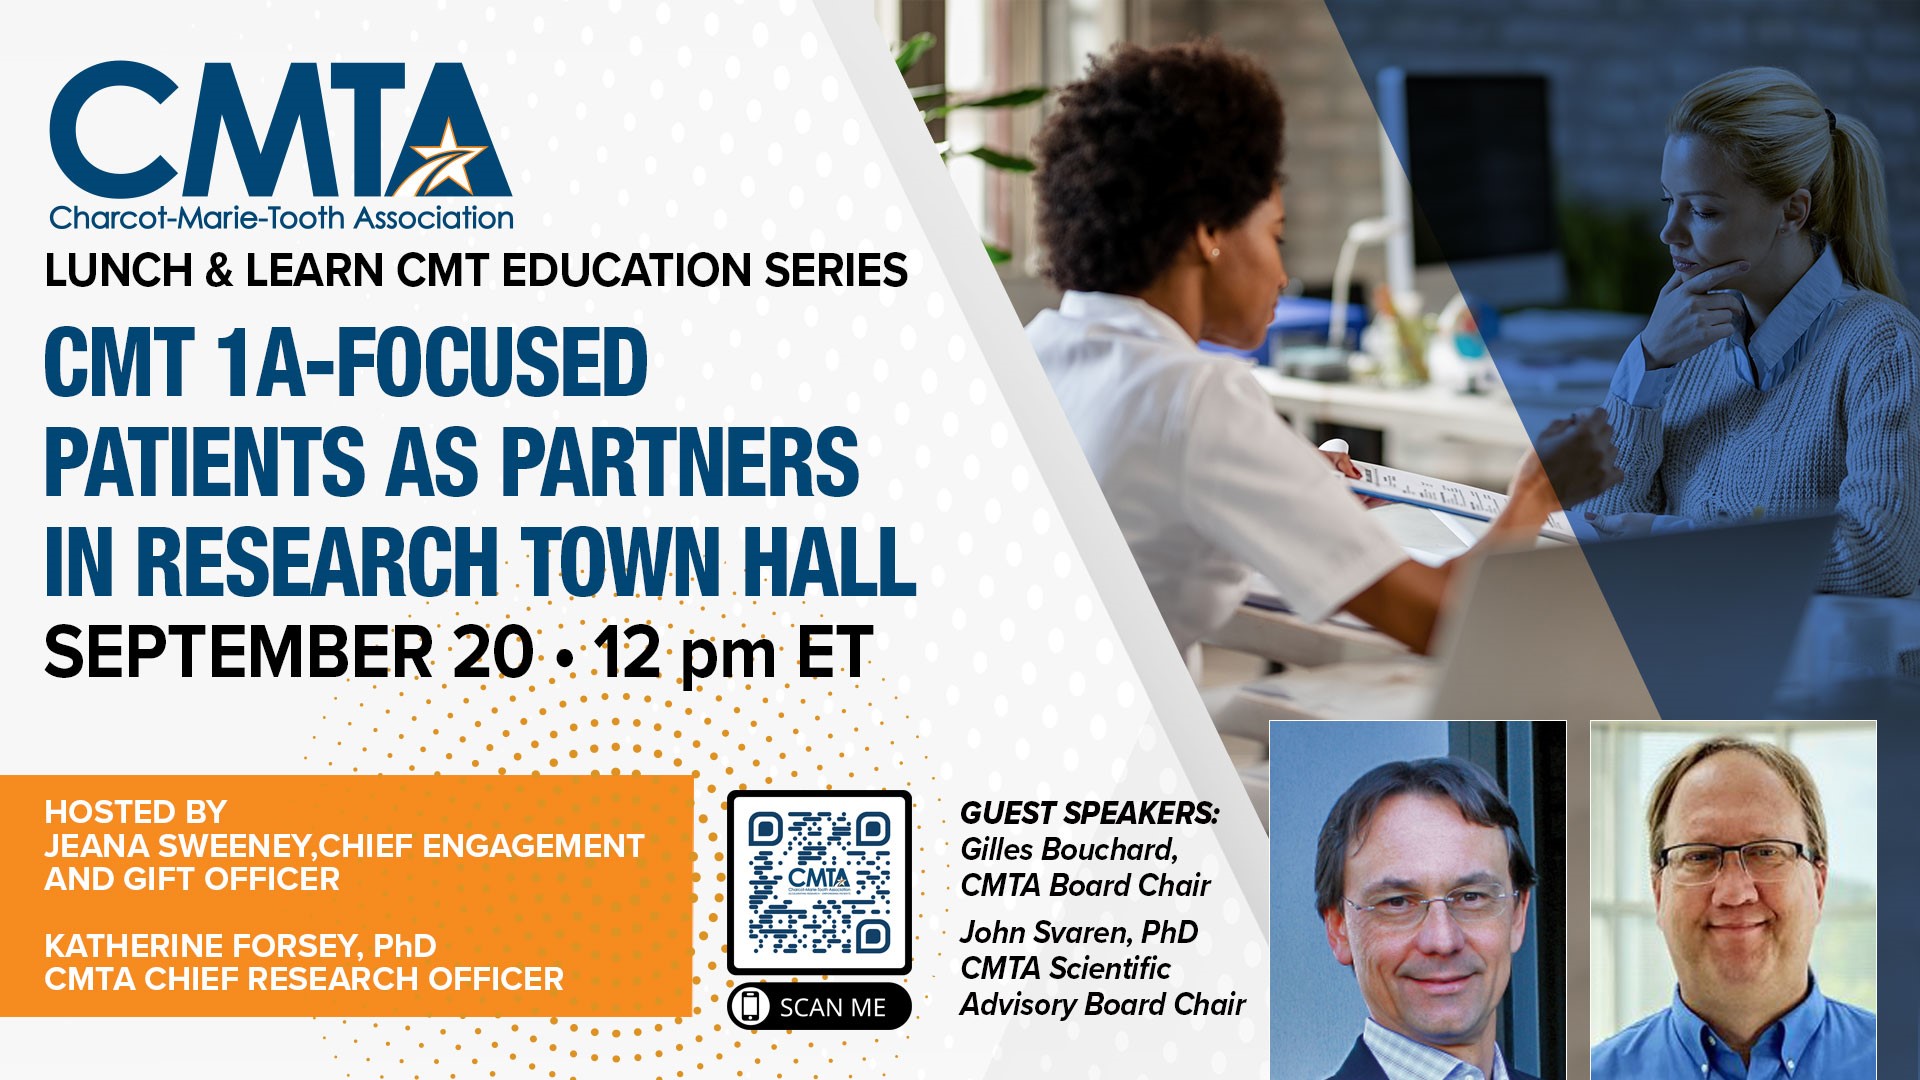 CMTA Lunch & Learn: CMT 1A-focused Patients as Partners in Research Town Hall